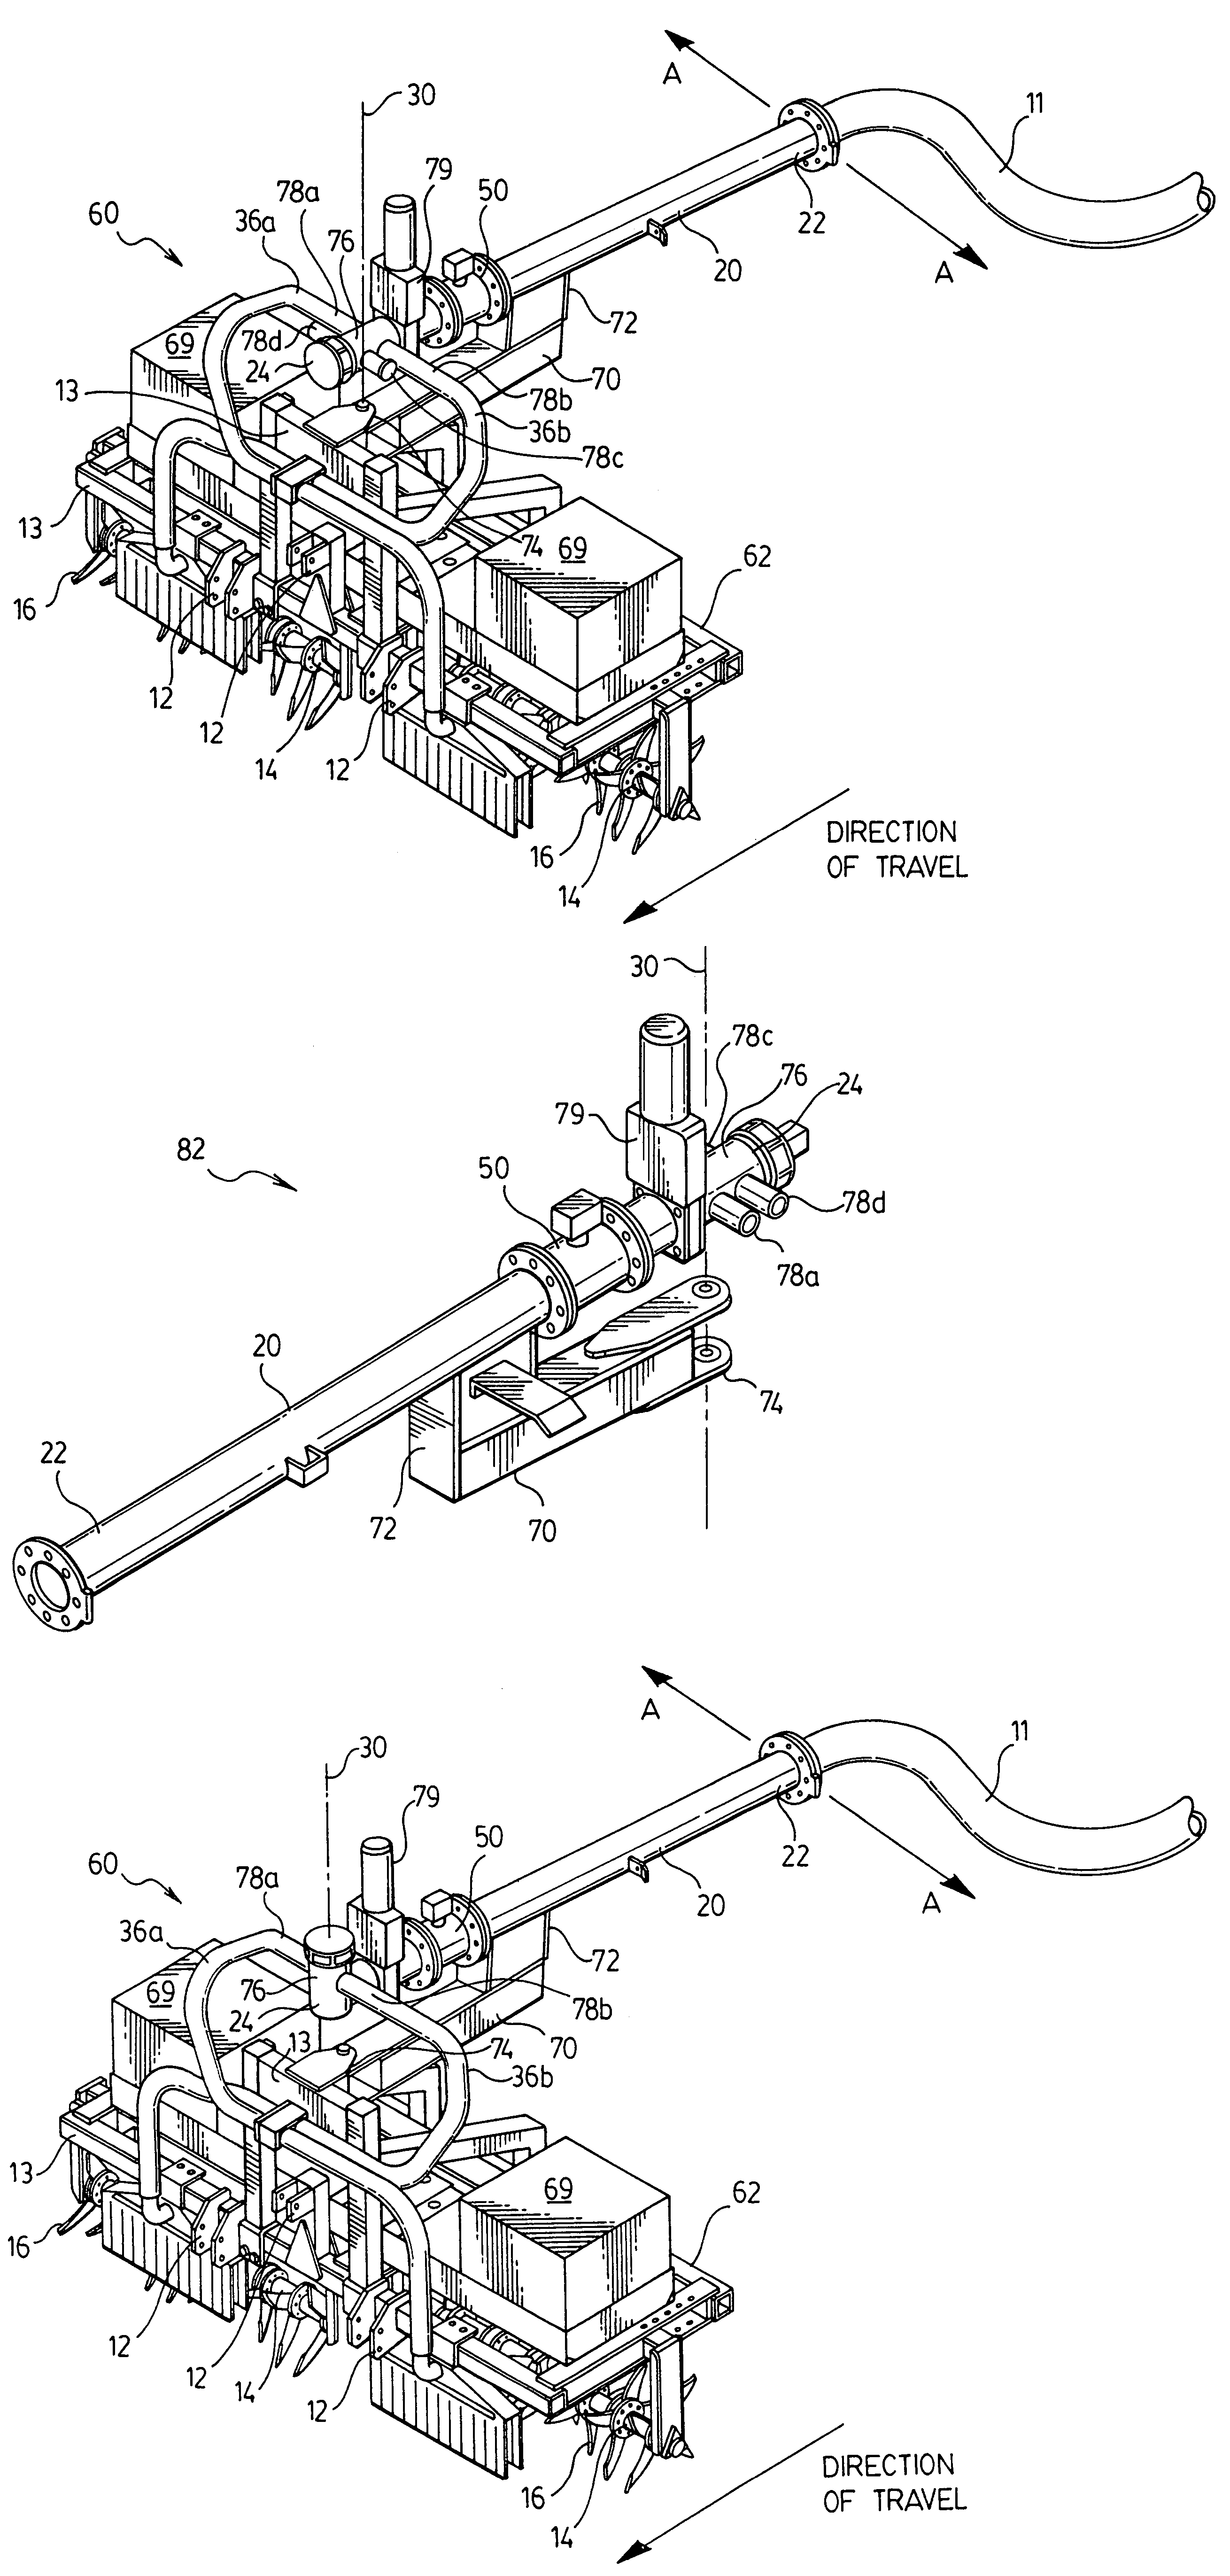 Apparatus for application of liquids or liquid-solid dispersions to soil, and a kit to adapt soil aeration or tillage devices to further supply liquids or liquid-solid dispersions to soil